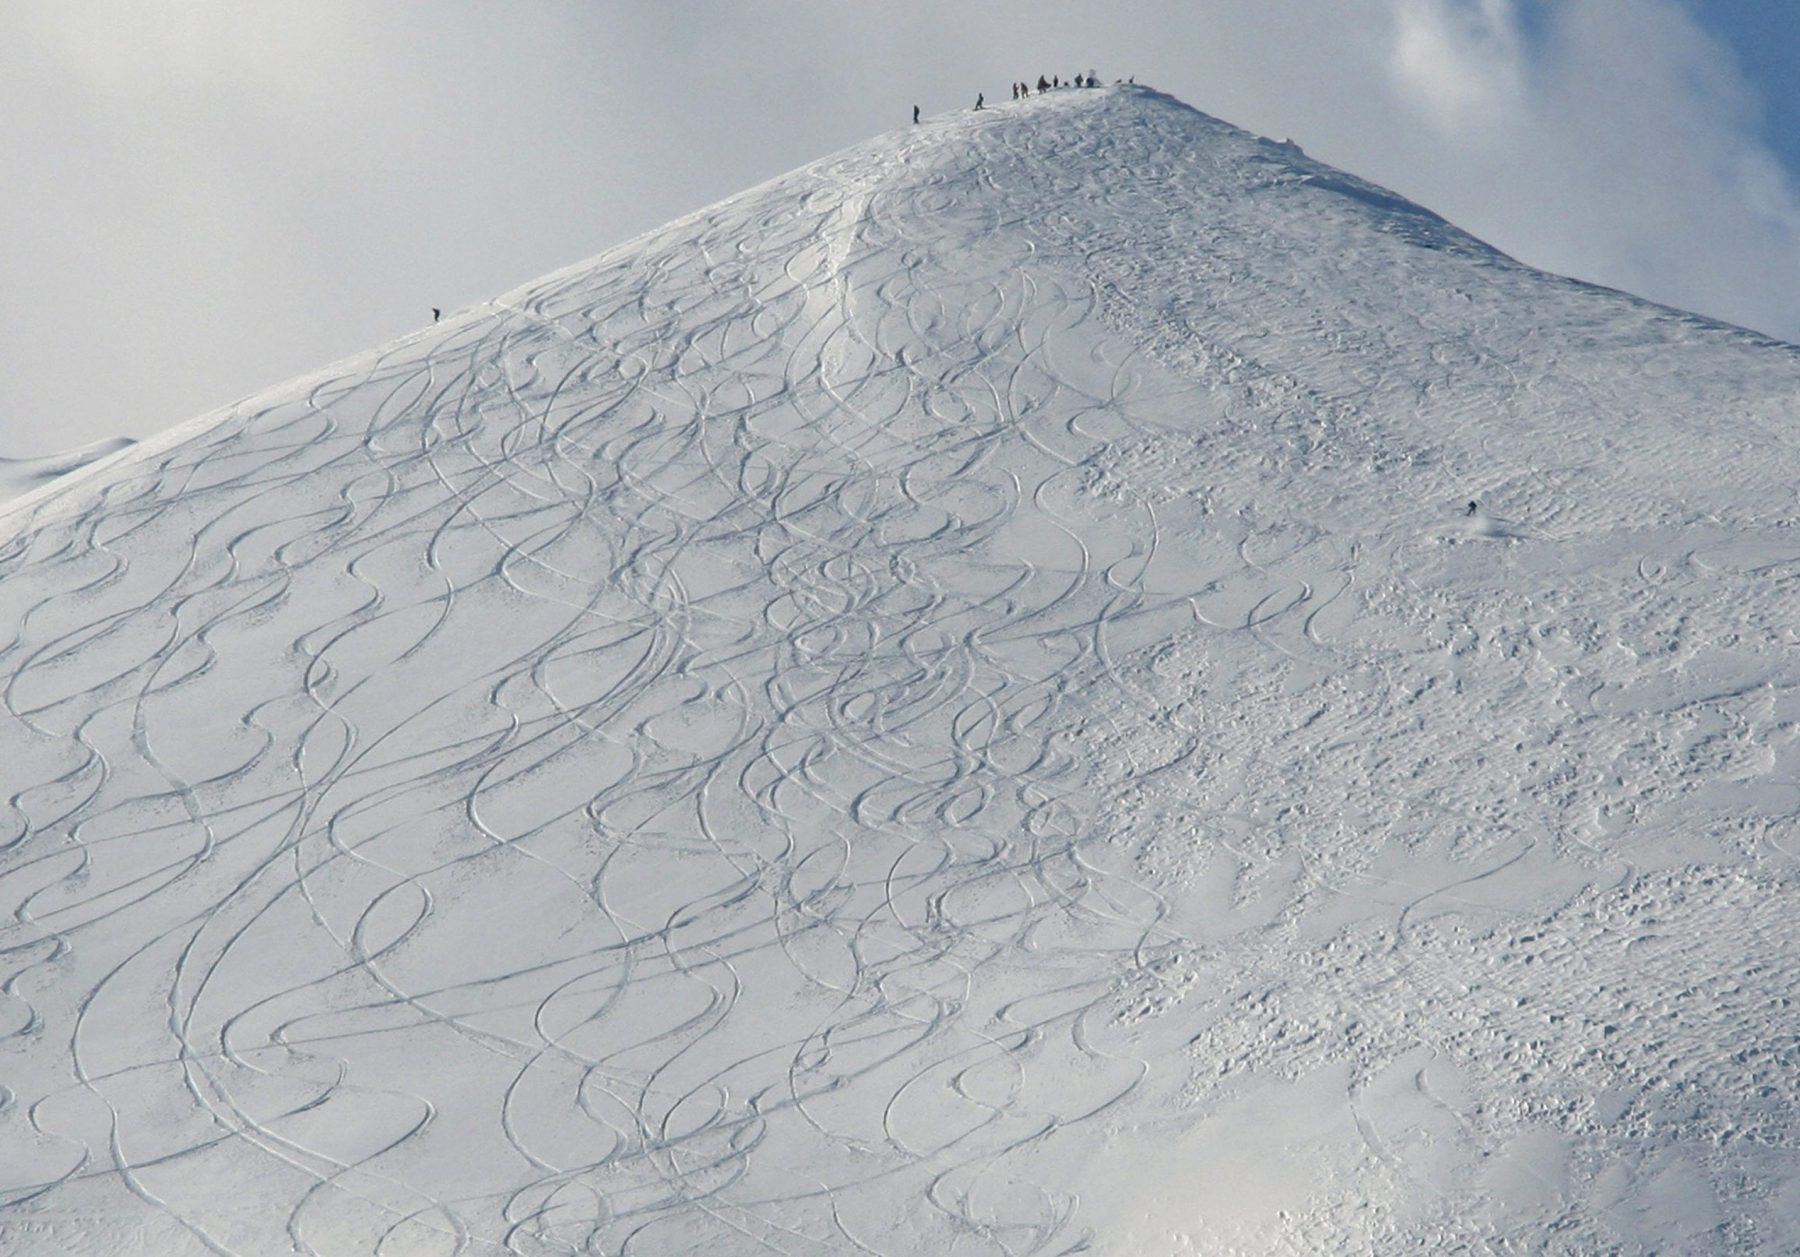 In this Feb. 3, 2011 photo, skiers stand atop the summit of Hanazono ski course in Niseko, northern Japan. Foreign tourists and investors have flocked to scenic Niseko in recent years, giving this rural region a badly needed economic jolt. (AP Photo/Koji Sasahara)